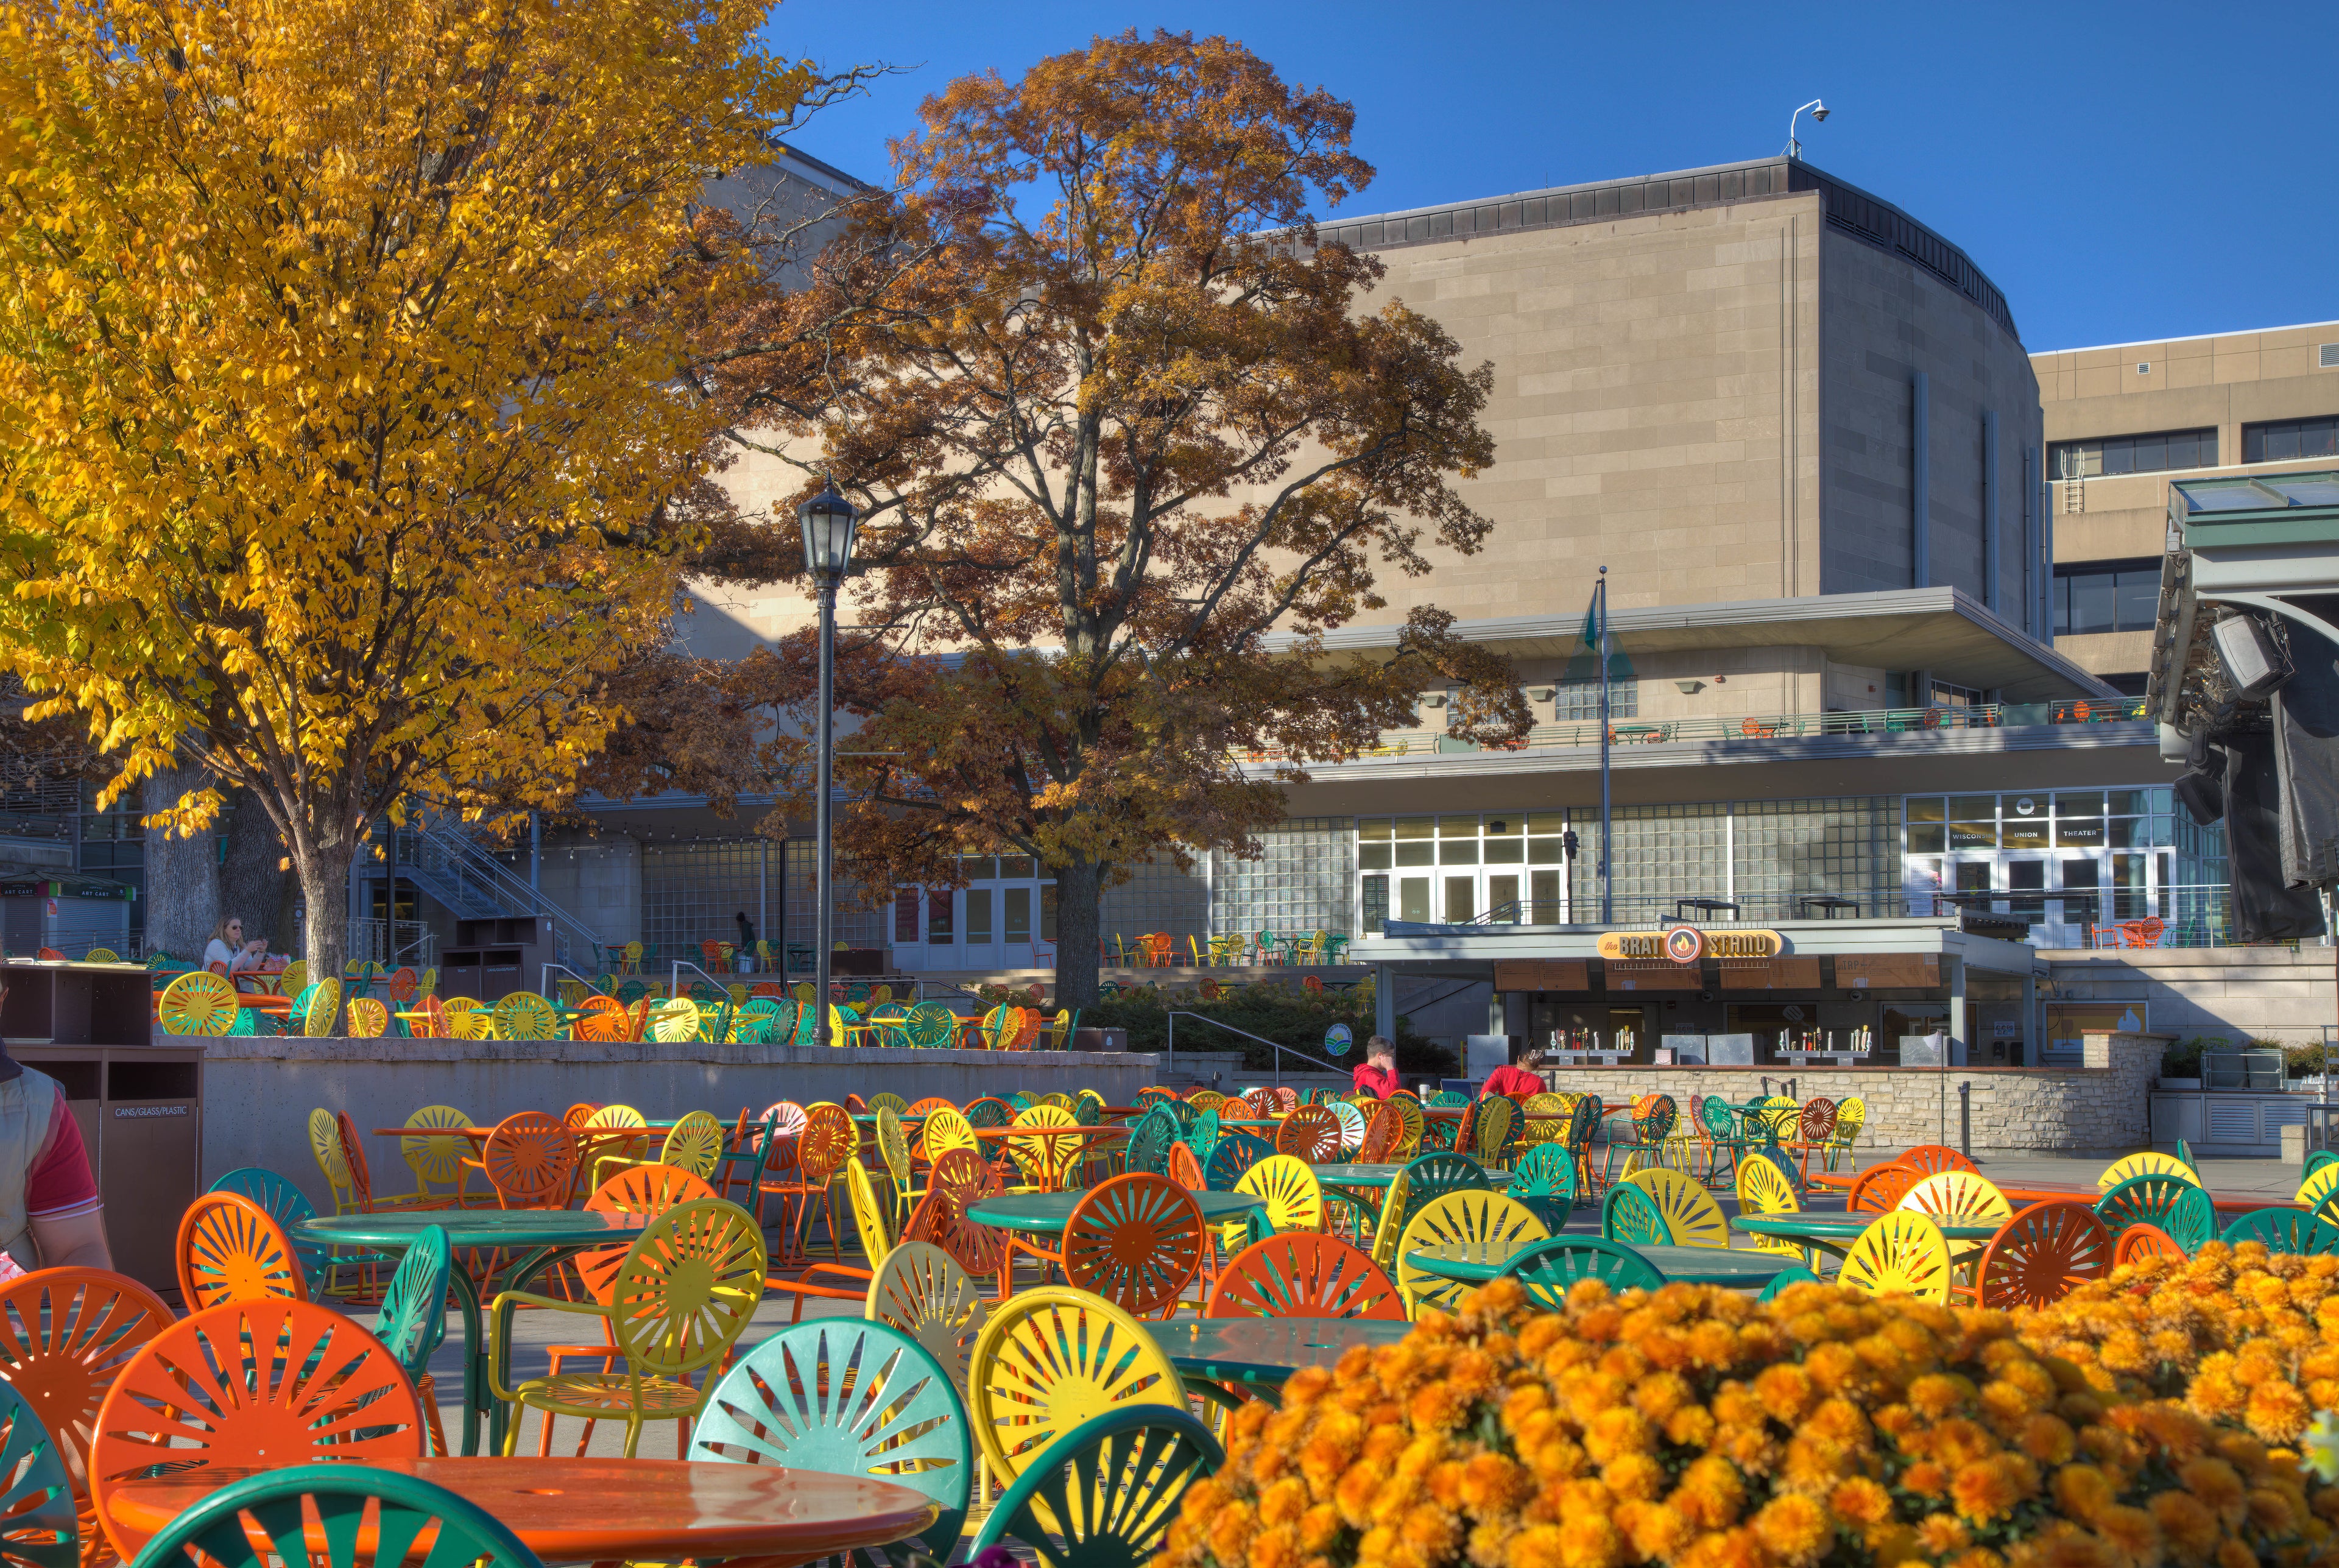 Tables at the Memorial Union Terrace with fall foliage on display.